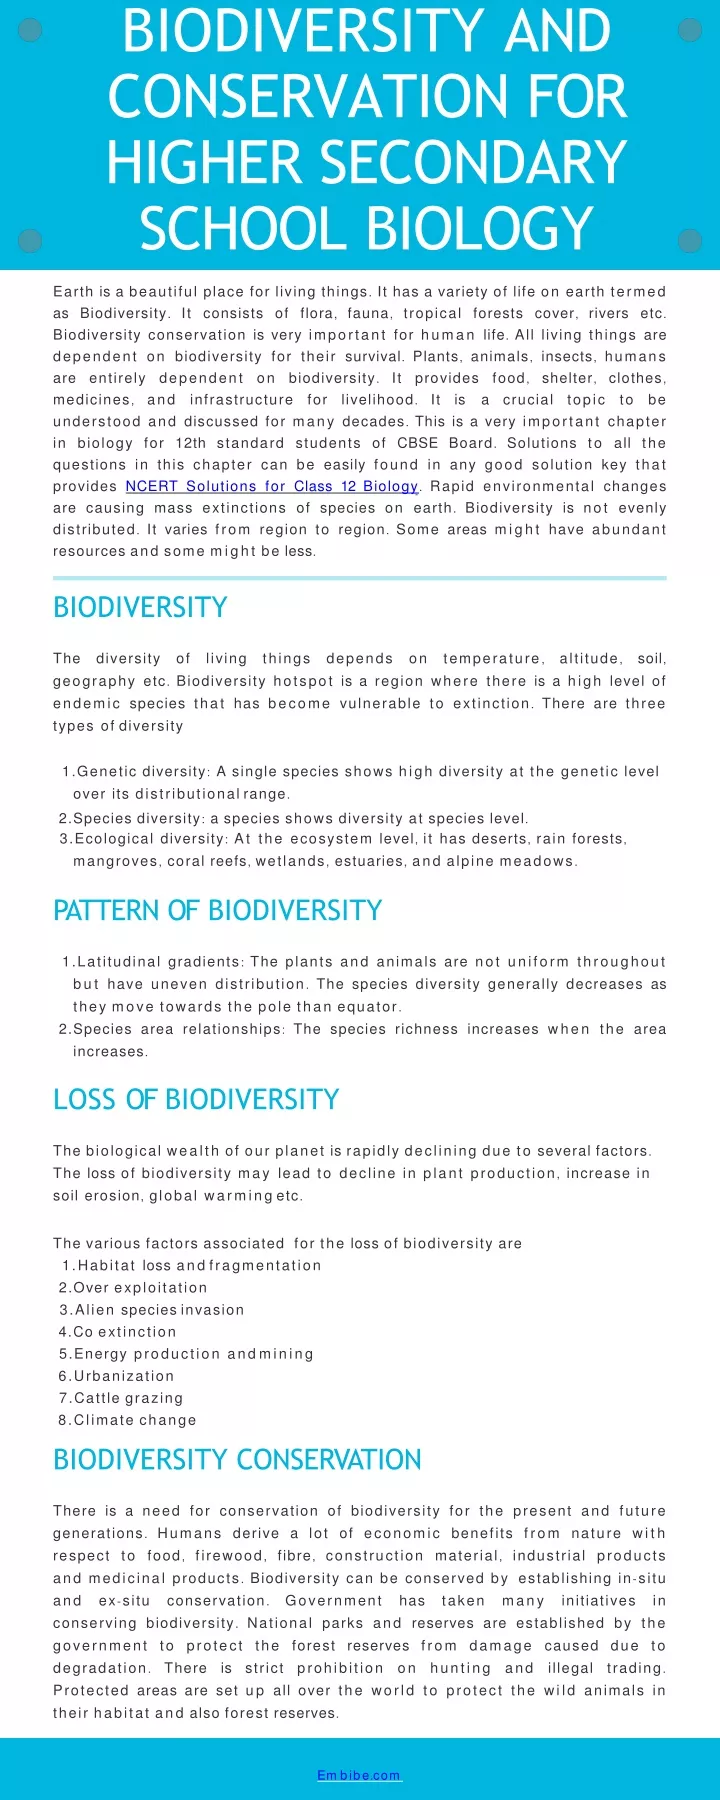 biodiversity and conservation for higher secondary school biology